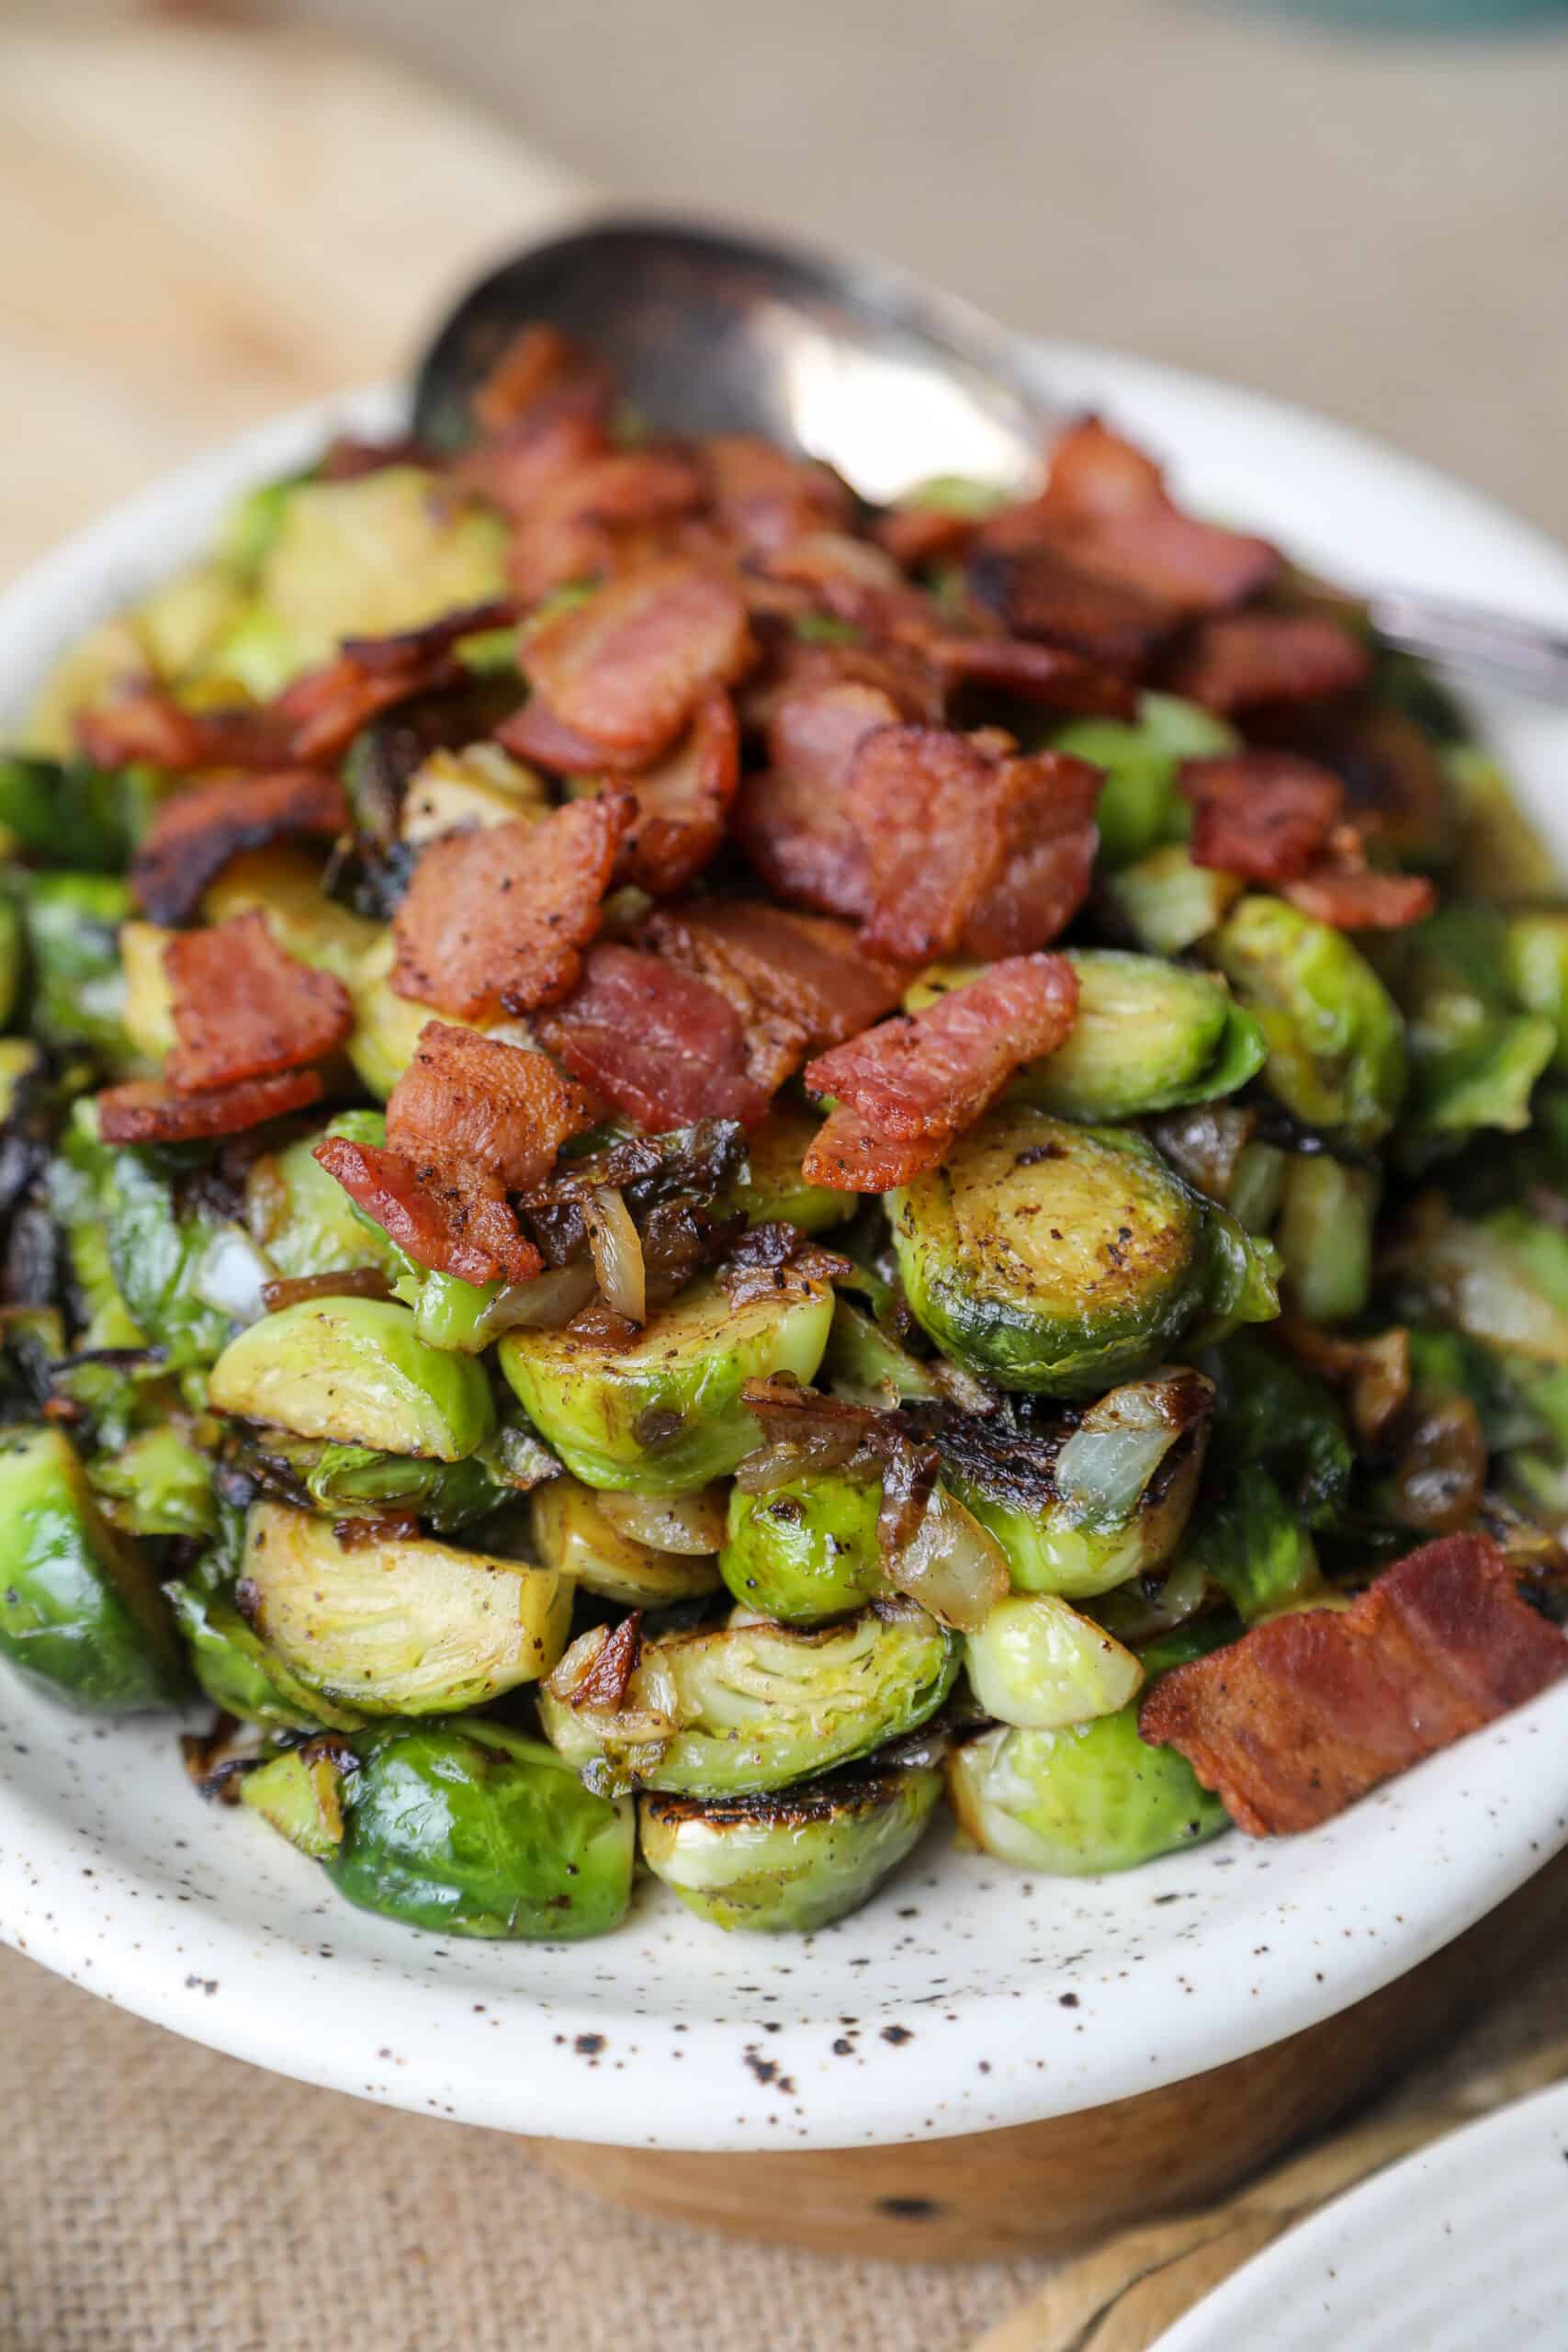 Keto Brussel Sprouts with Bacon